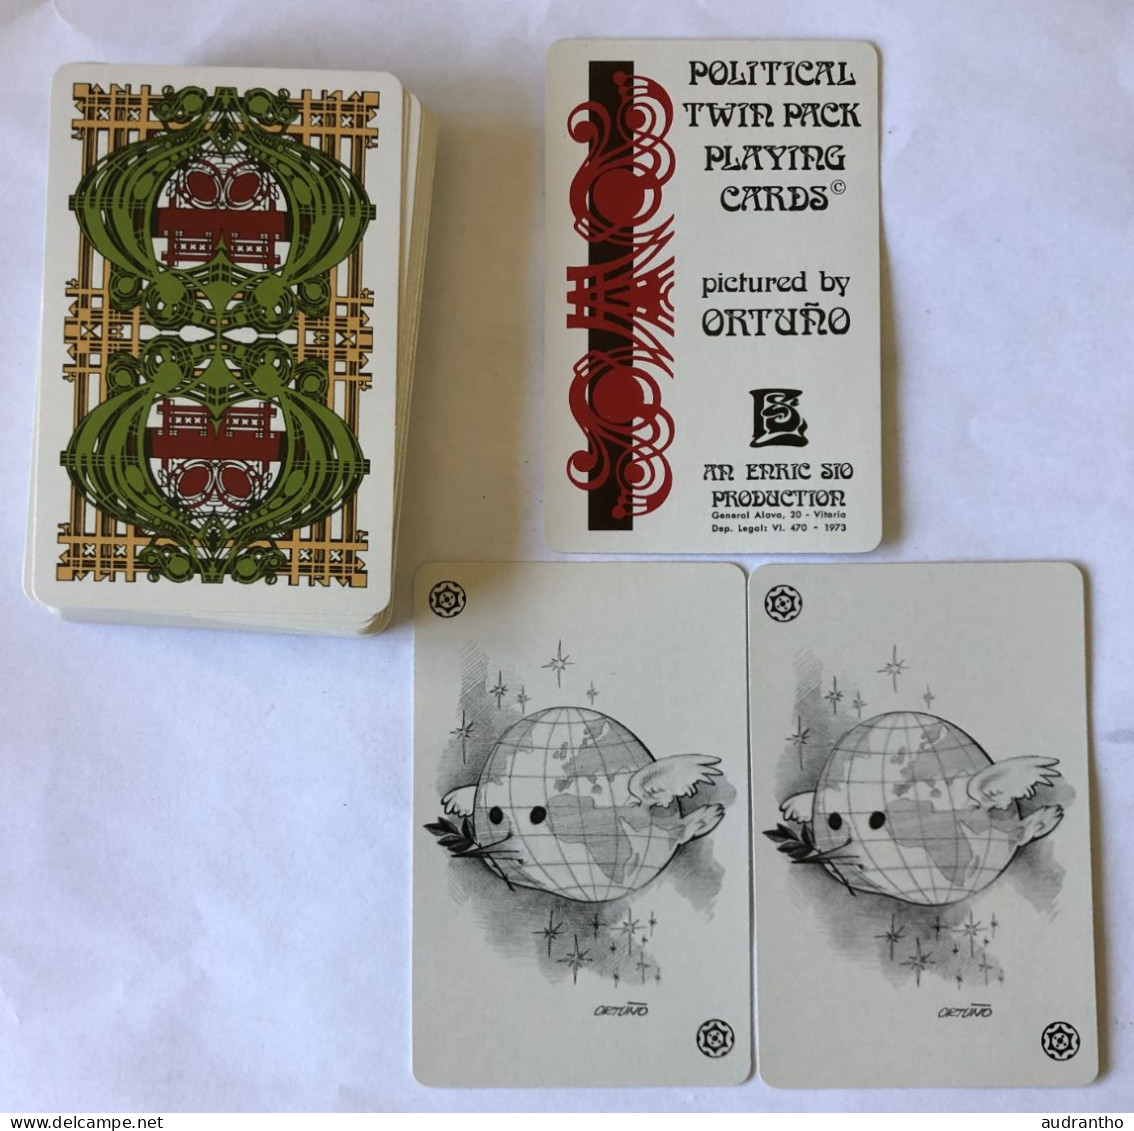 Très Beau Double Jeu 54 Cartes 1973 - Caricature Personnalité - Political Twin Pack Playing Cards By ORTUNO - Erric Sio - 54 Karten